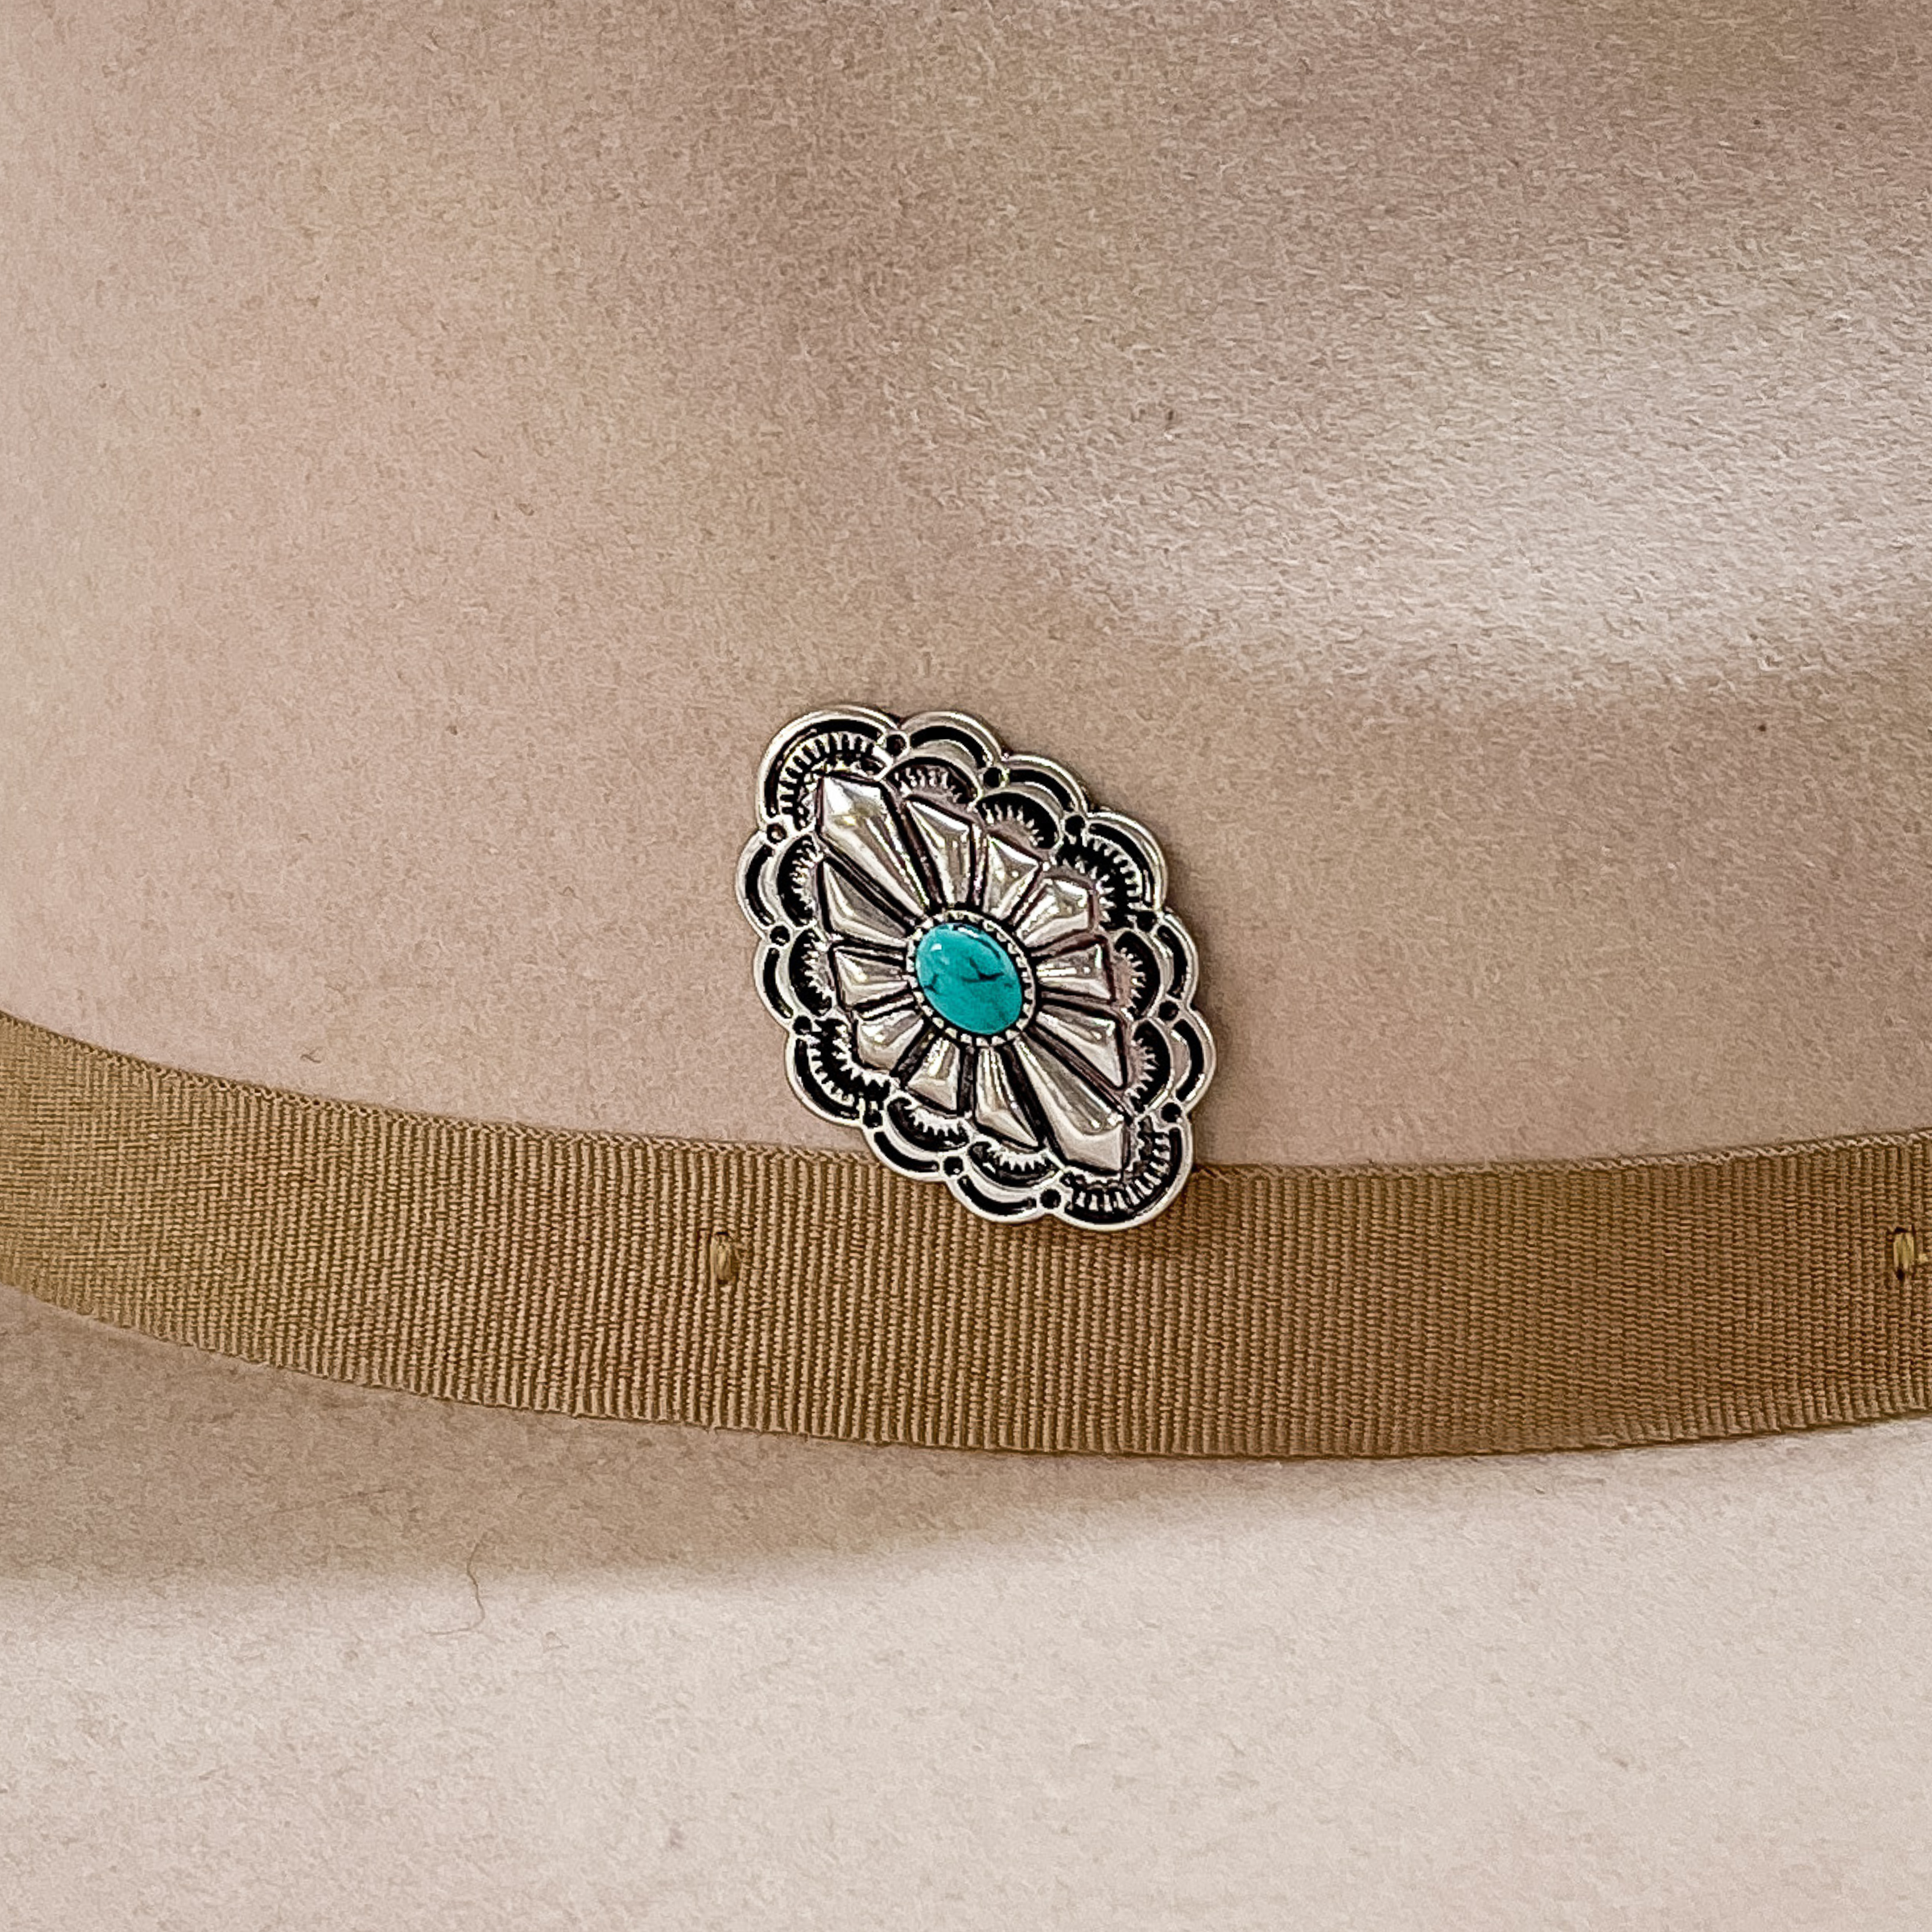 Silver, diamond concho with detailed engraving and a center turquoise stone hat pin. This hat pin is pictured on a beige hat. 